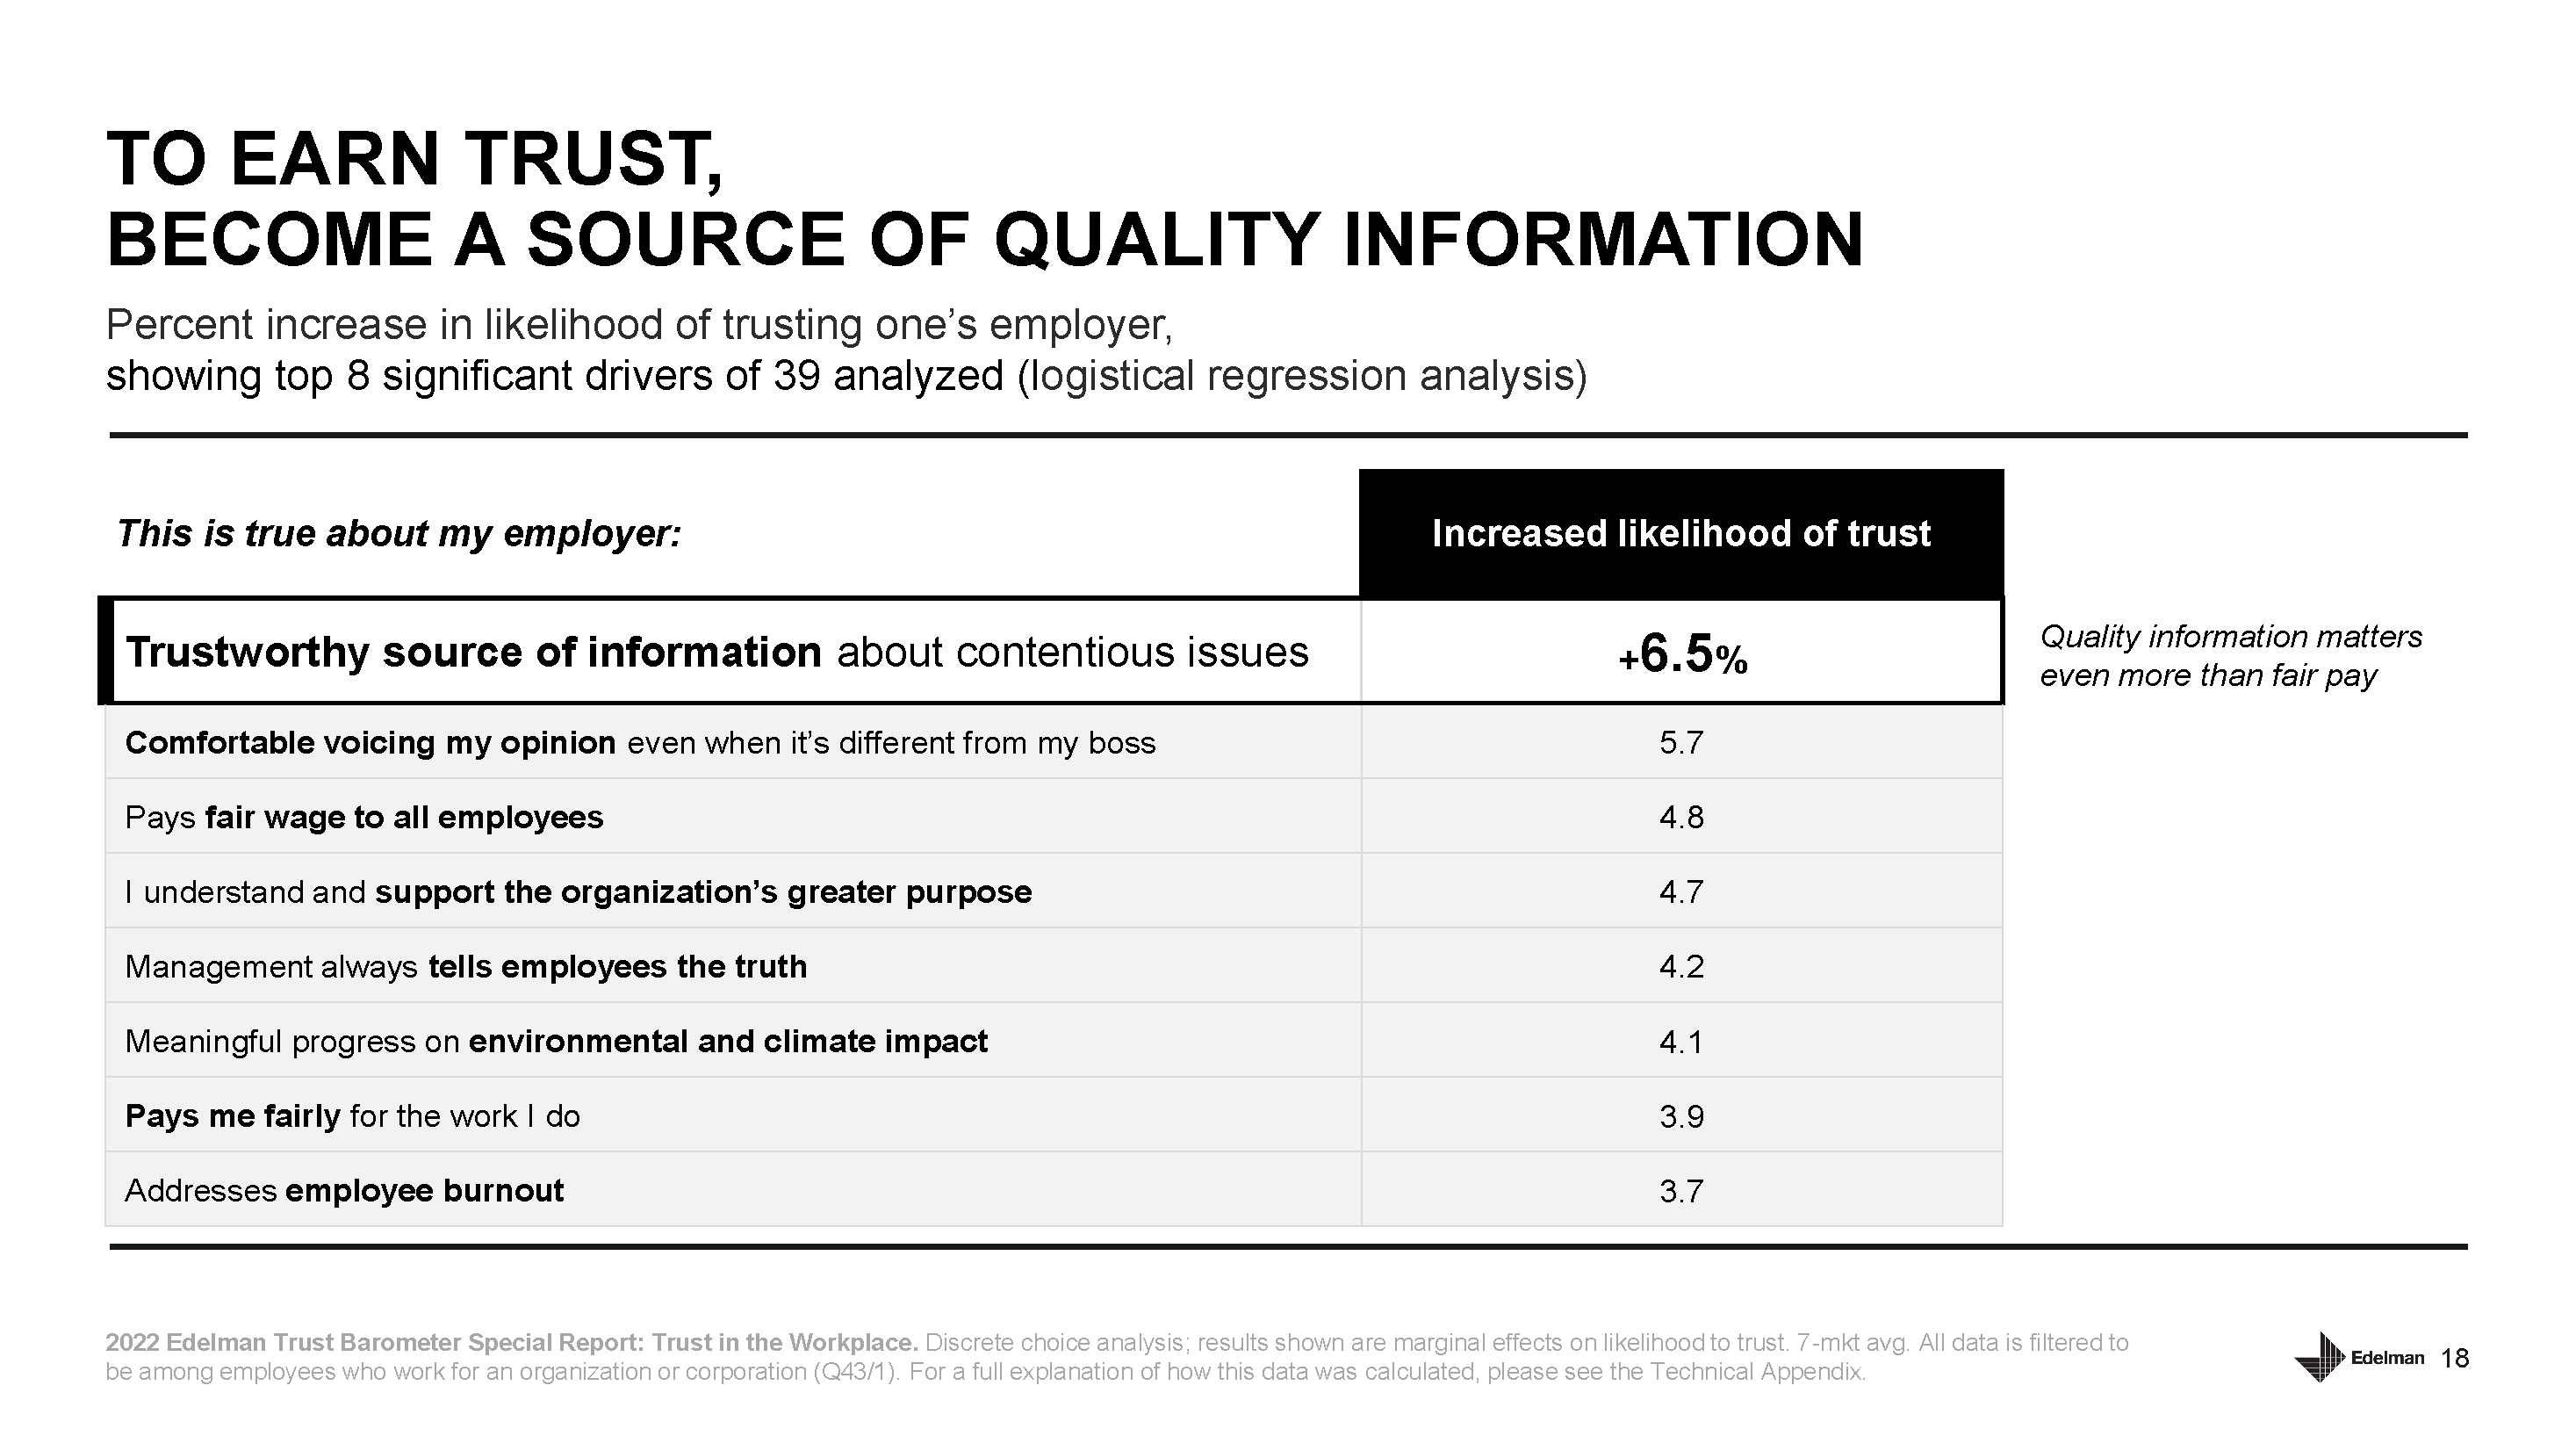 2022 Edelman Trust Barometer Special Report Trust in the Workplace_Page_18